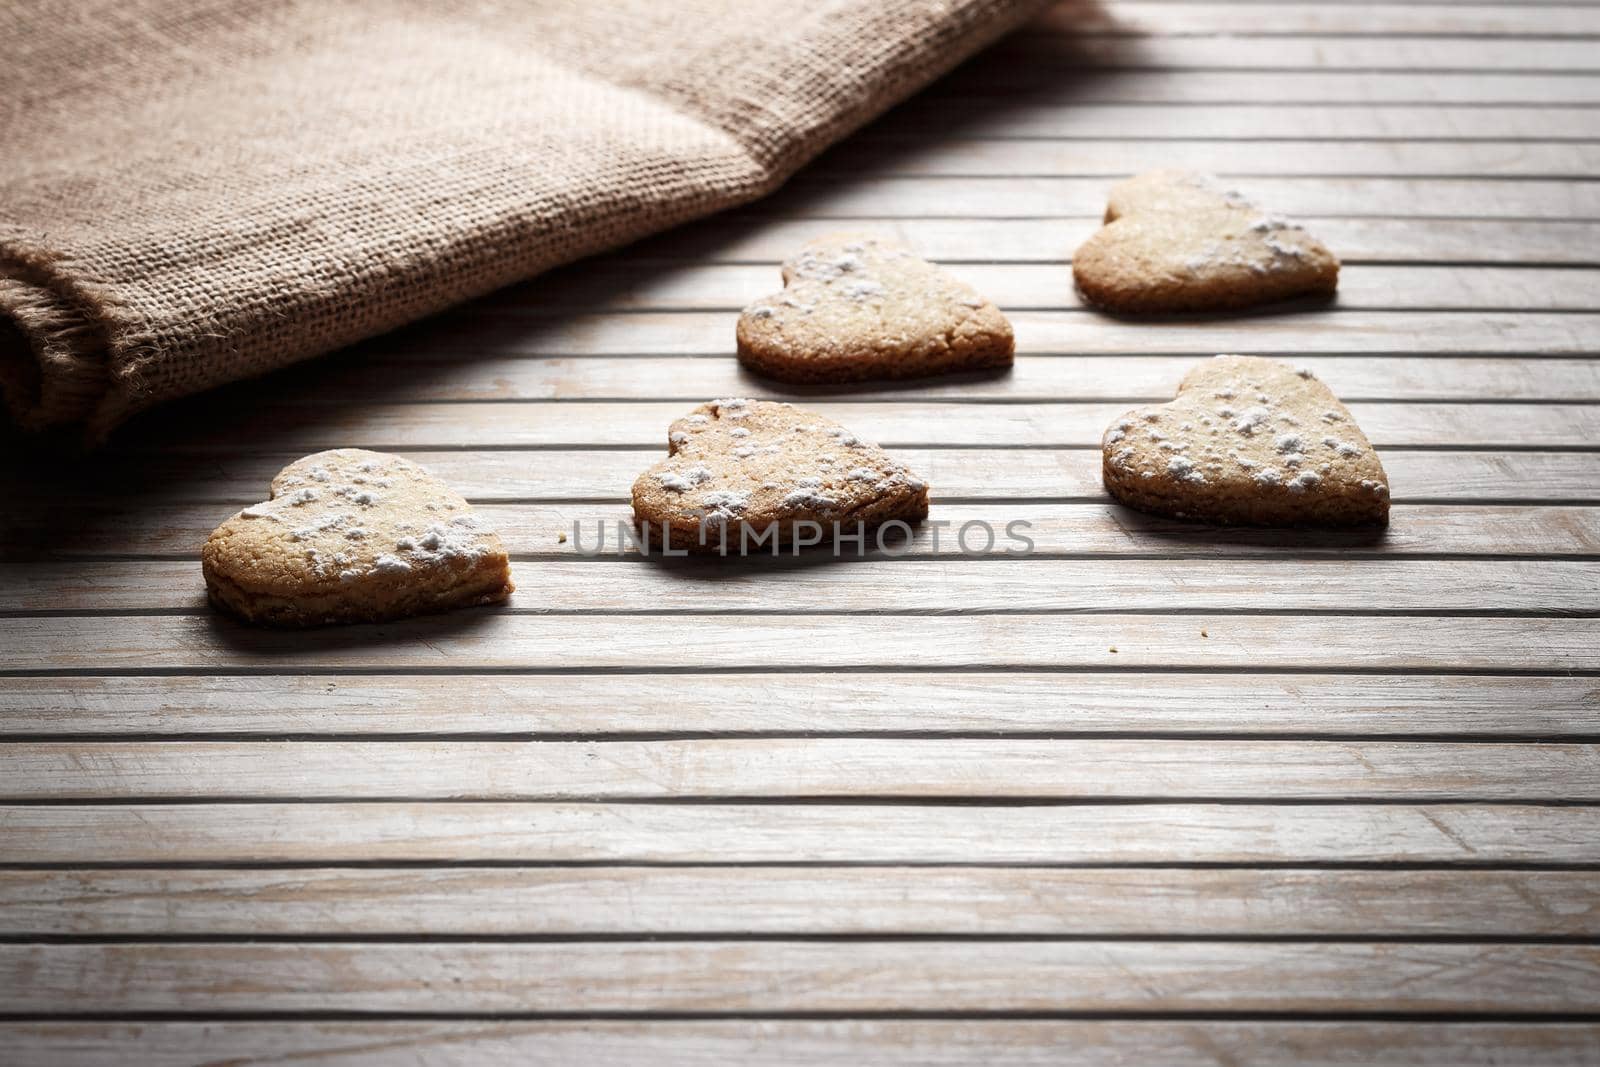 Delicious heart-shaped homemade cookies sprinkled with icing sugar on a wooden board with sackcloth in the background. Horizontal image seen against backlight.